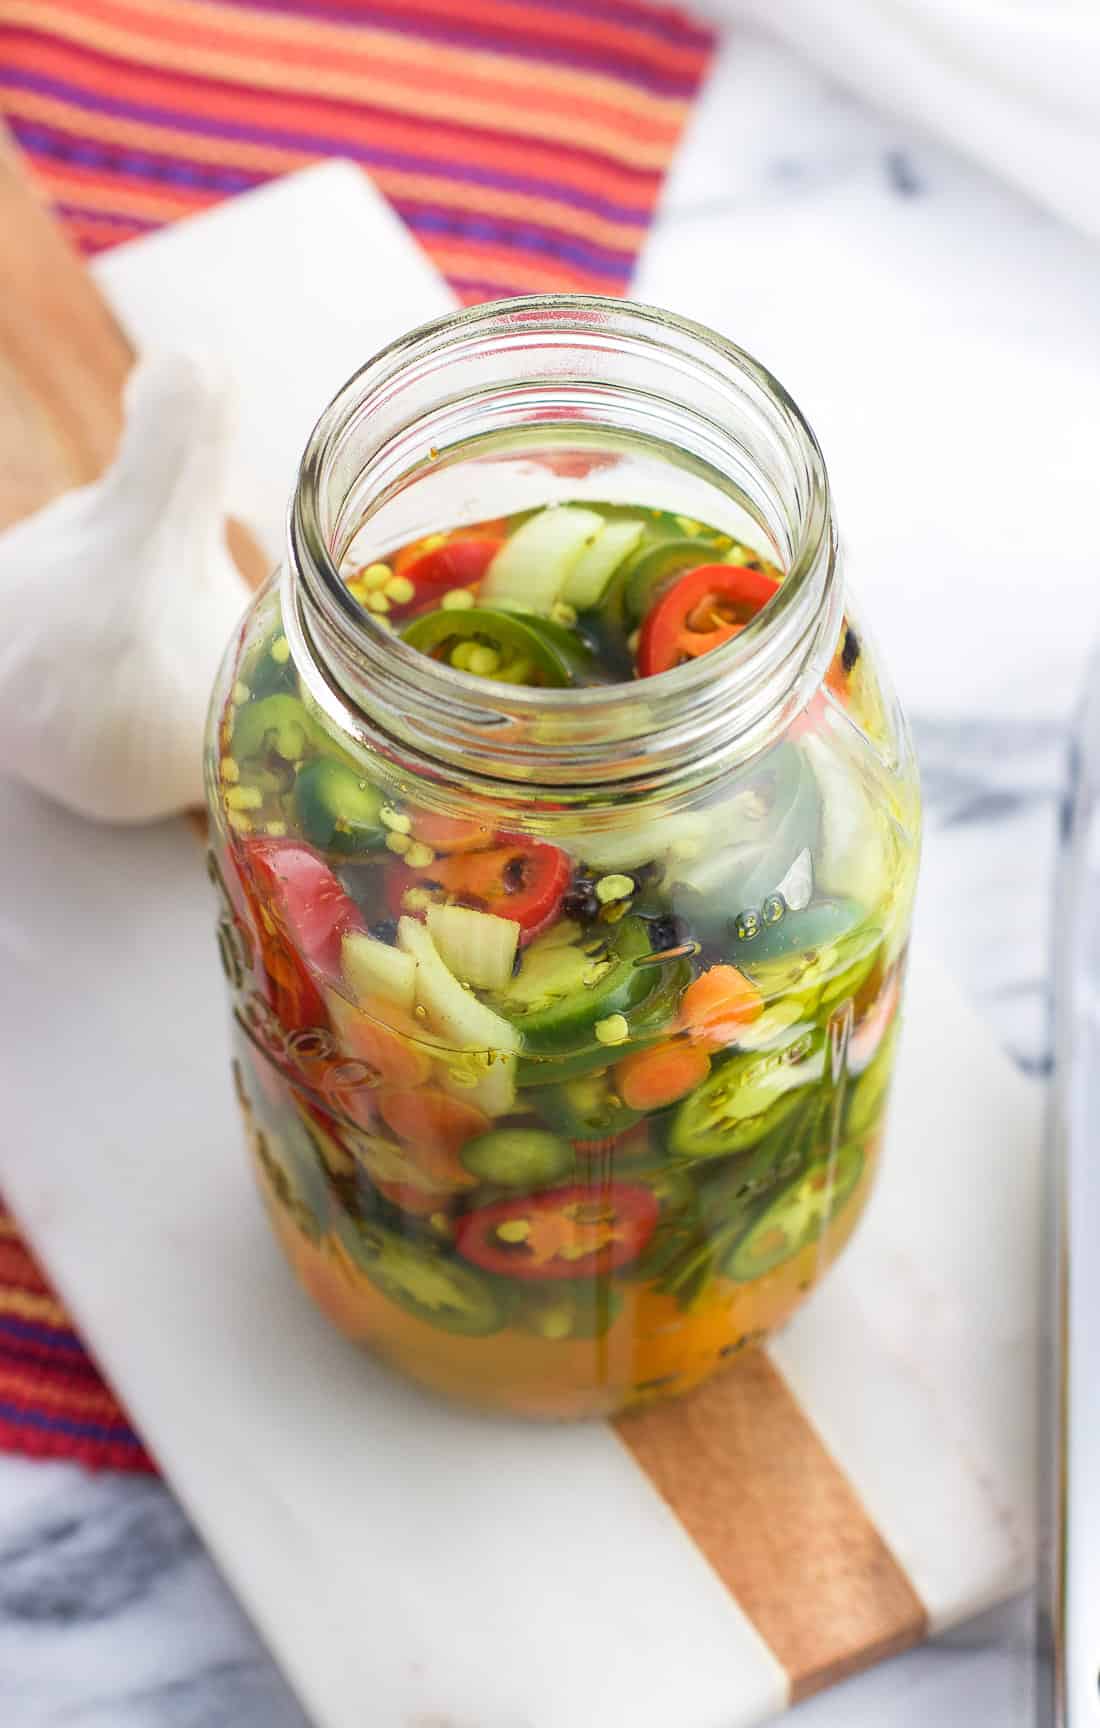 A large glass jar filled with sliced jalapeno peppers, onions, garlic, and carrots and pickling liquid next to a whole head of garlic